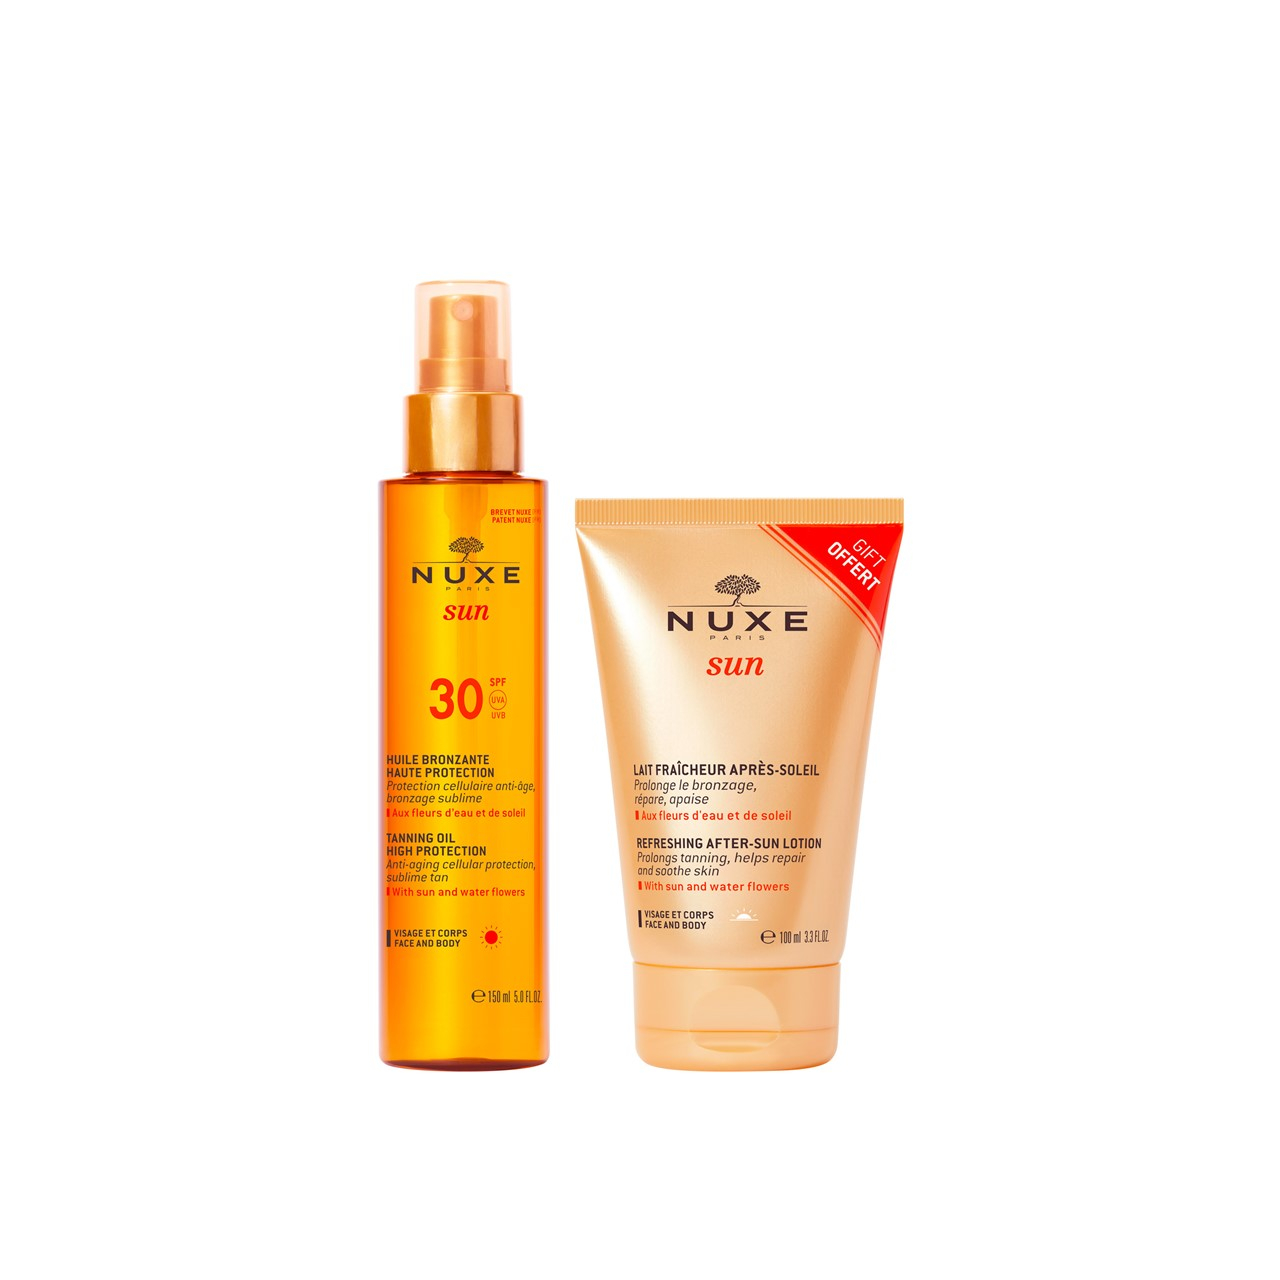 NUXE Sun Tanning Oil SPF30 150ml + Refreshing After-Sun Lotion 100ml